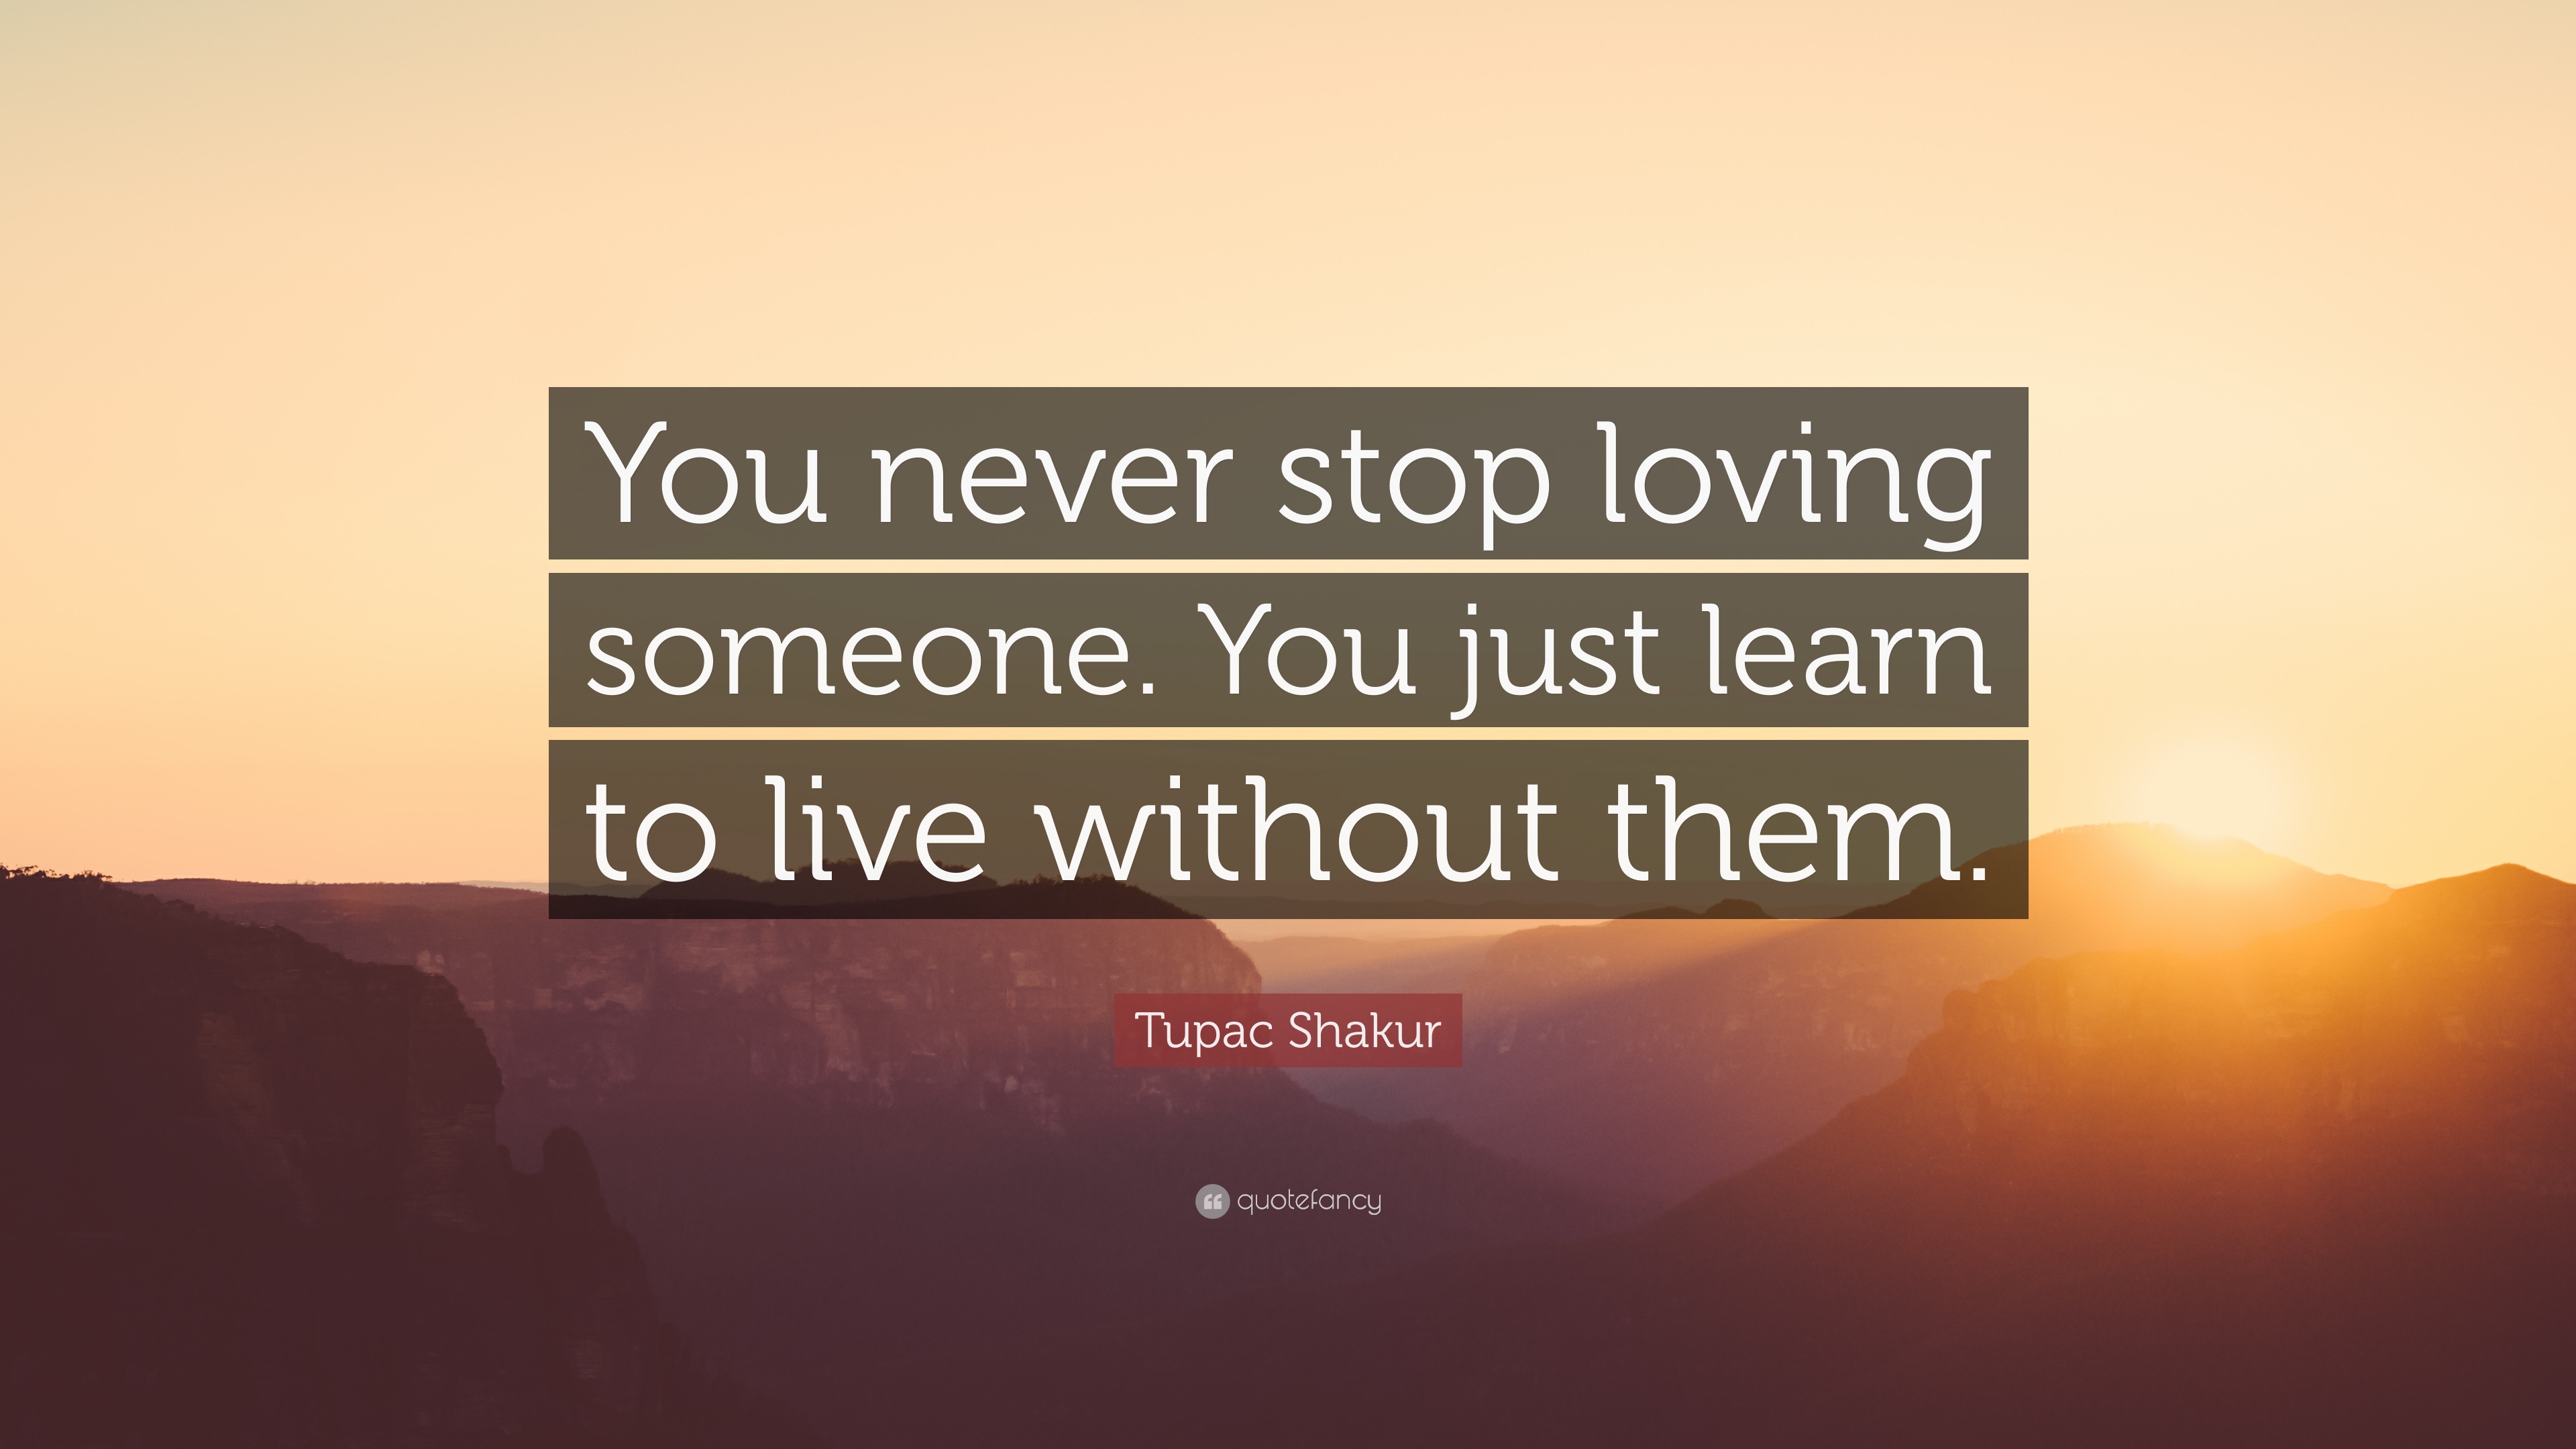 Tupac Shakur Quote: “You never stop loving someone. You just learn to ...